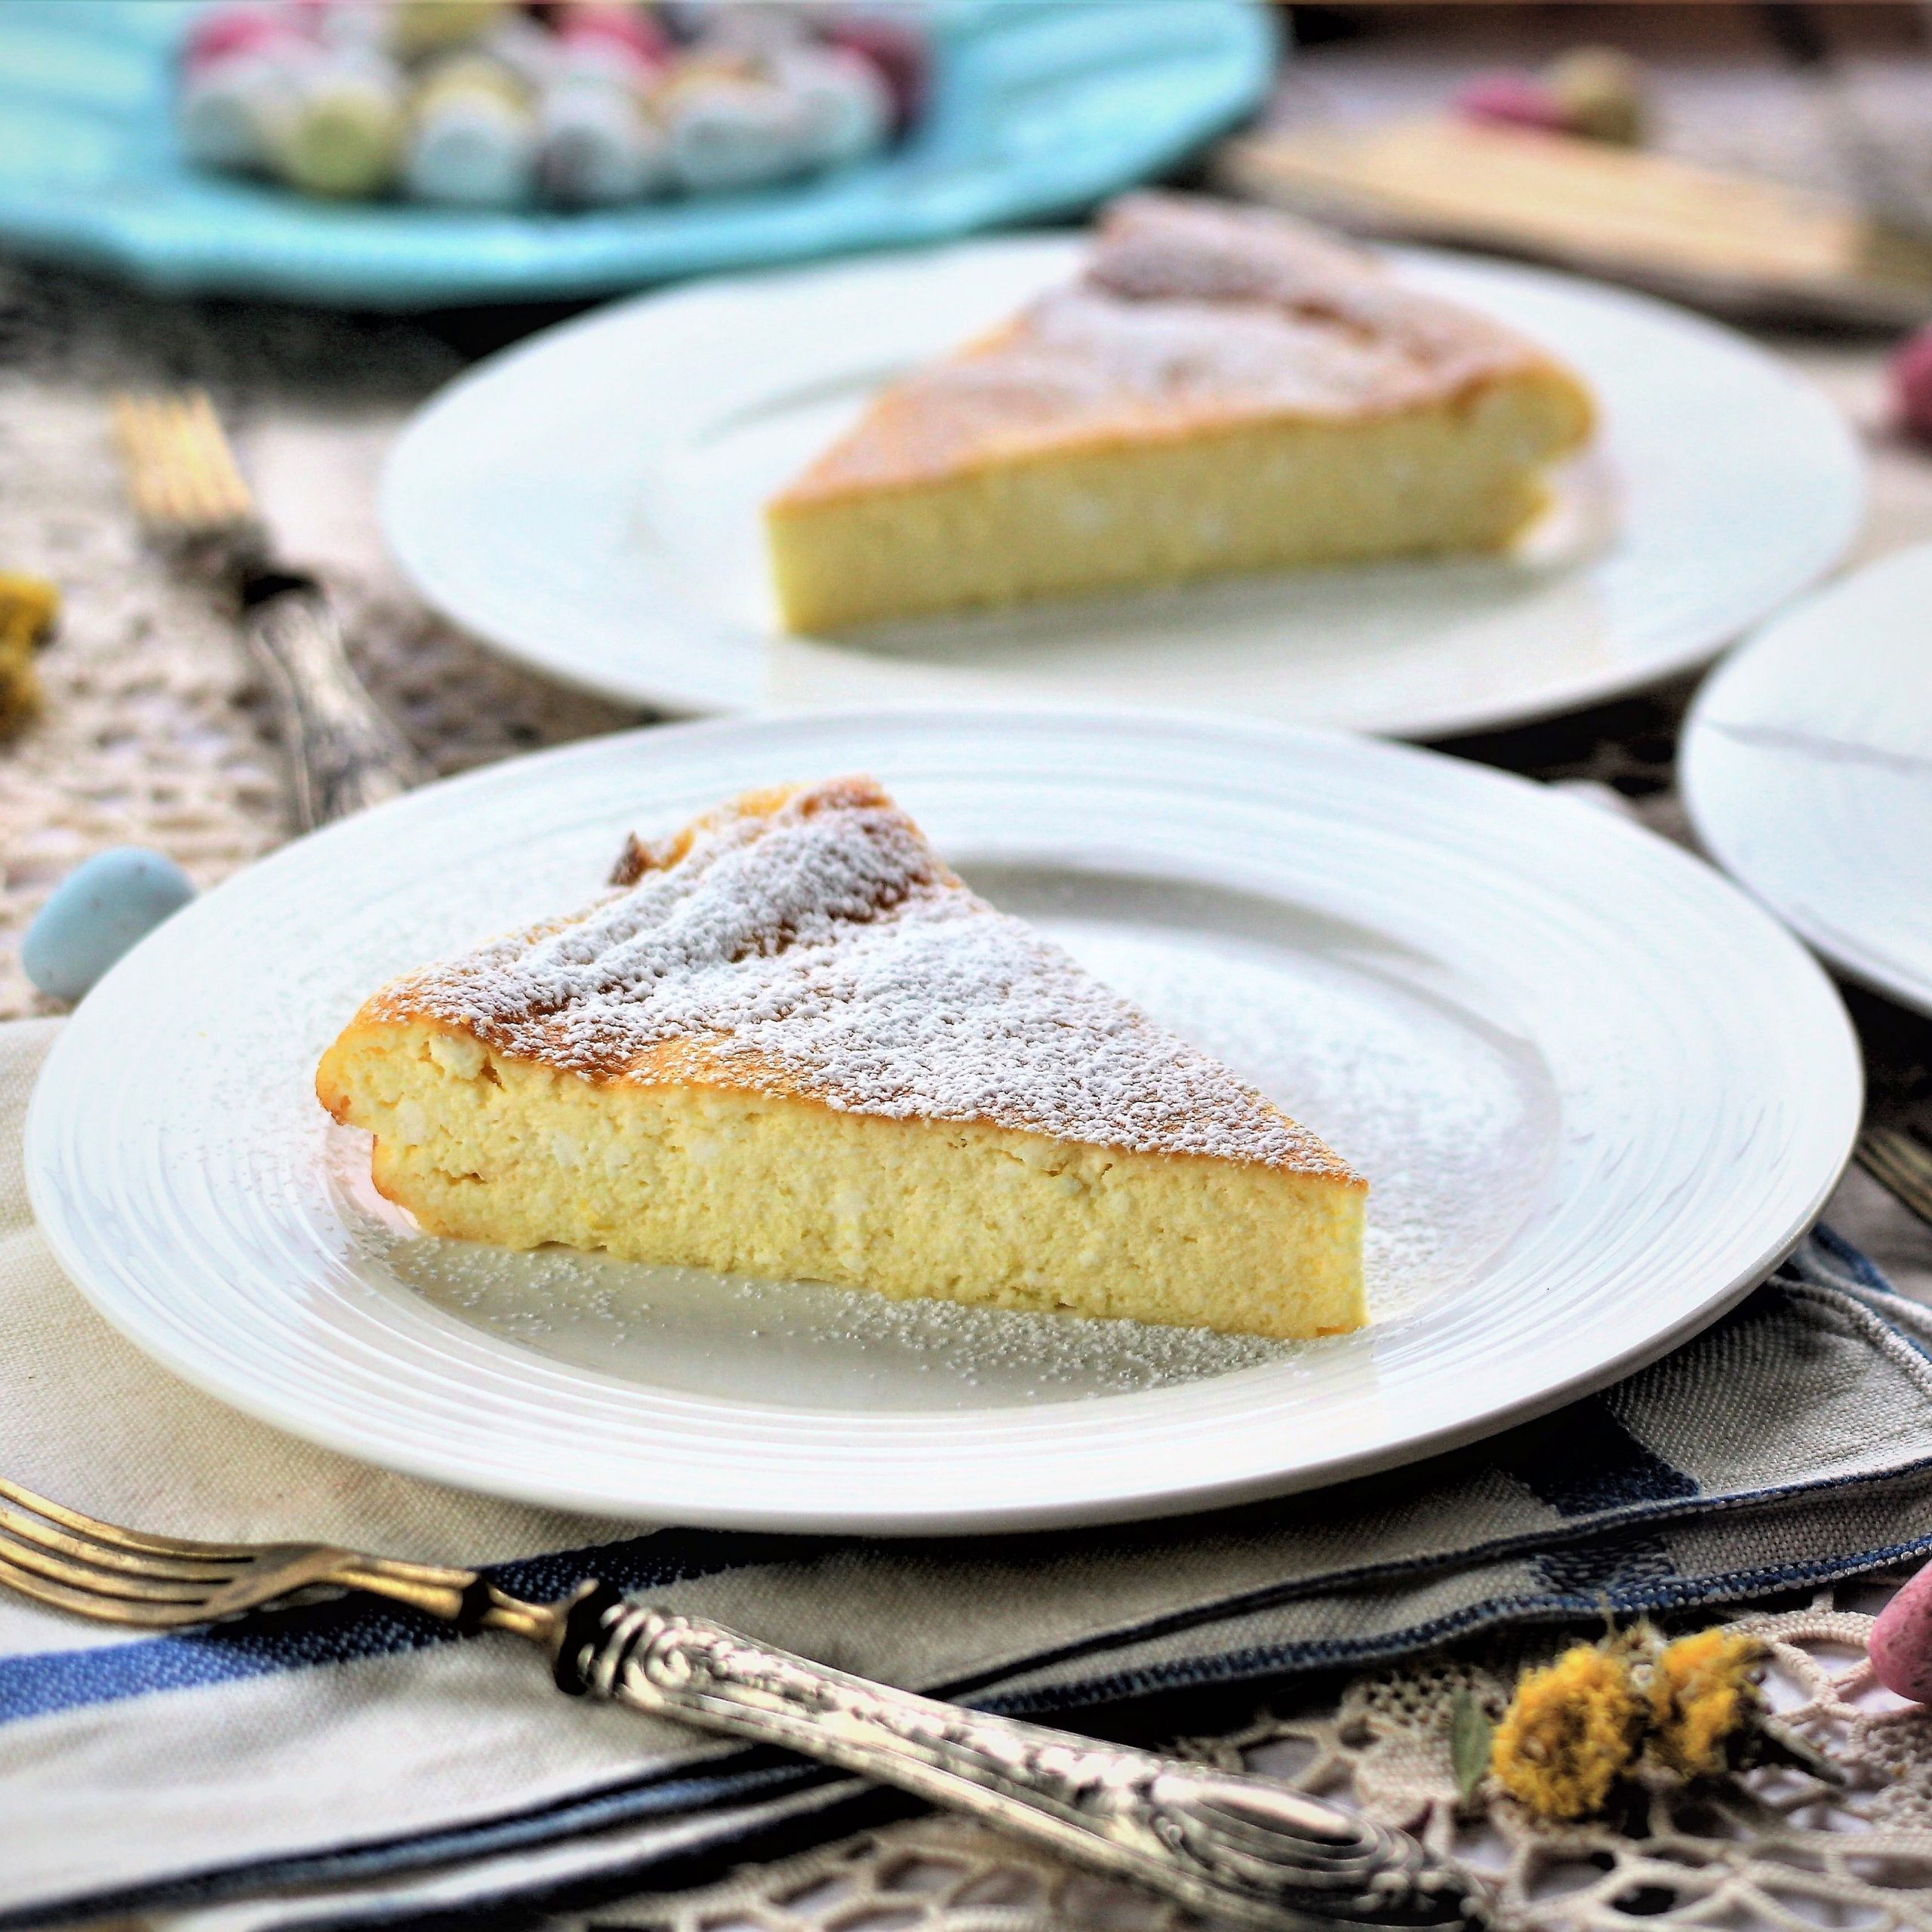 Italian Easter Dessert Recipes And Traditions
 Sweet Ricotta Easter Calzone Recipe